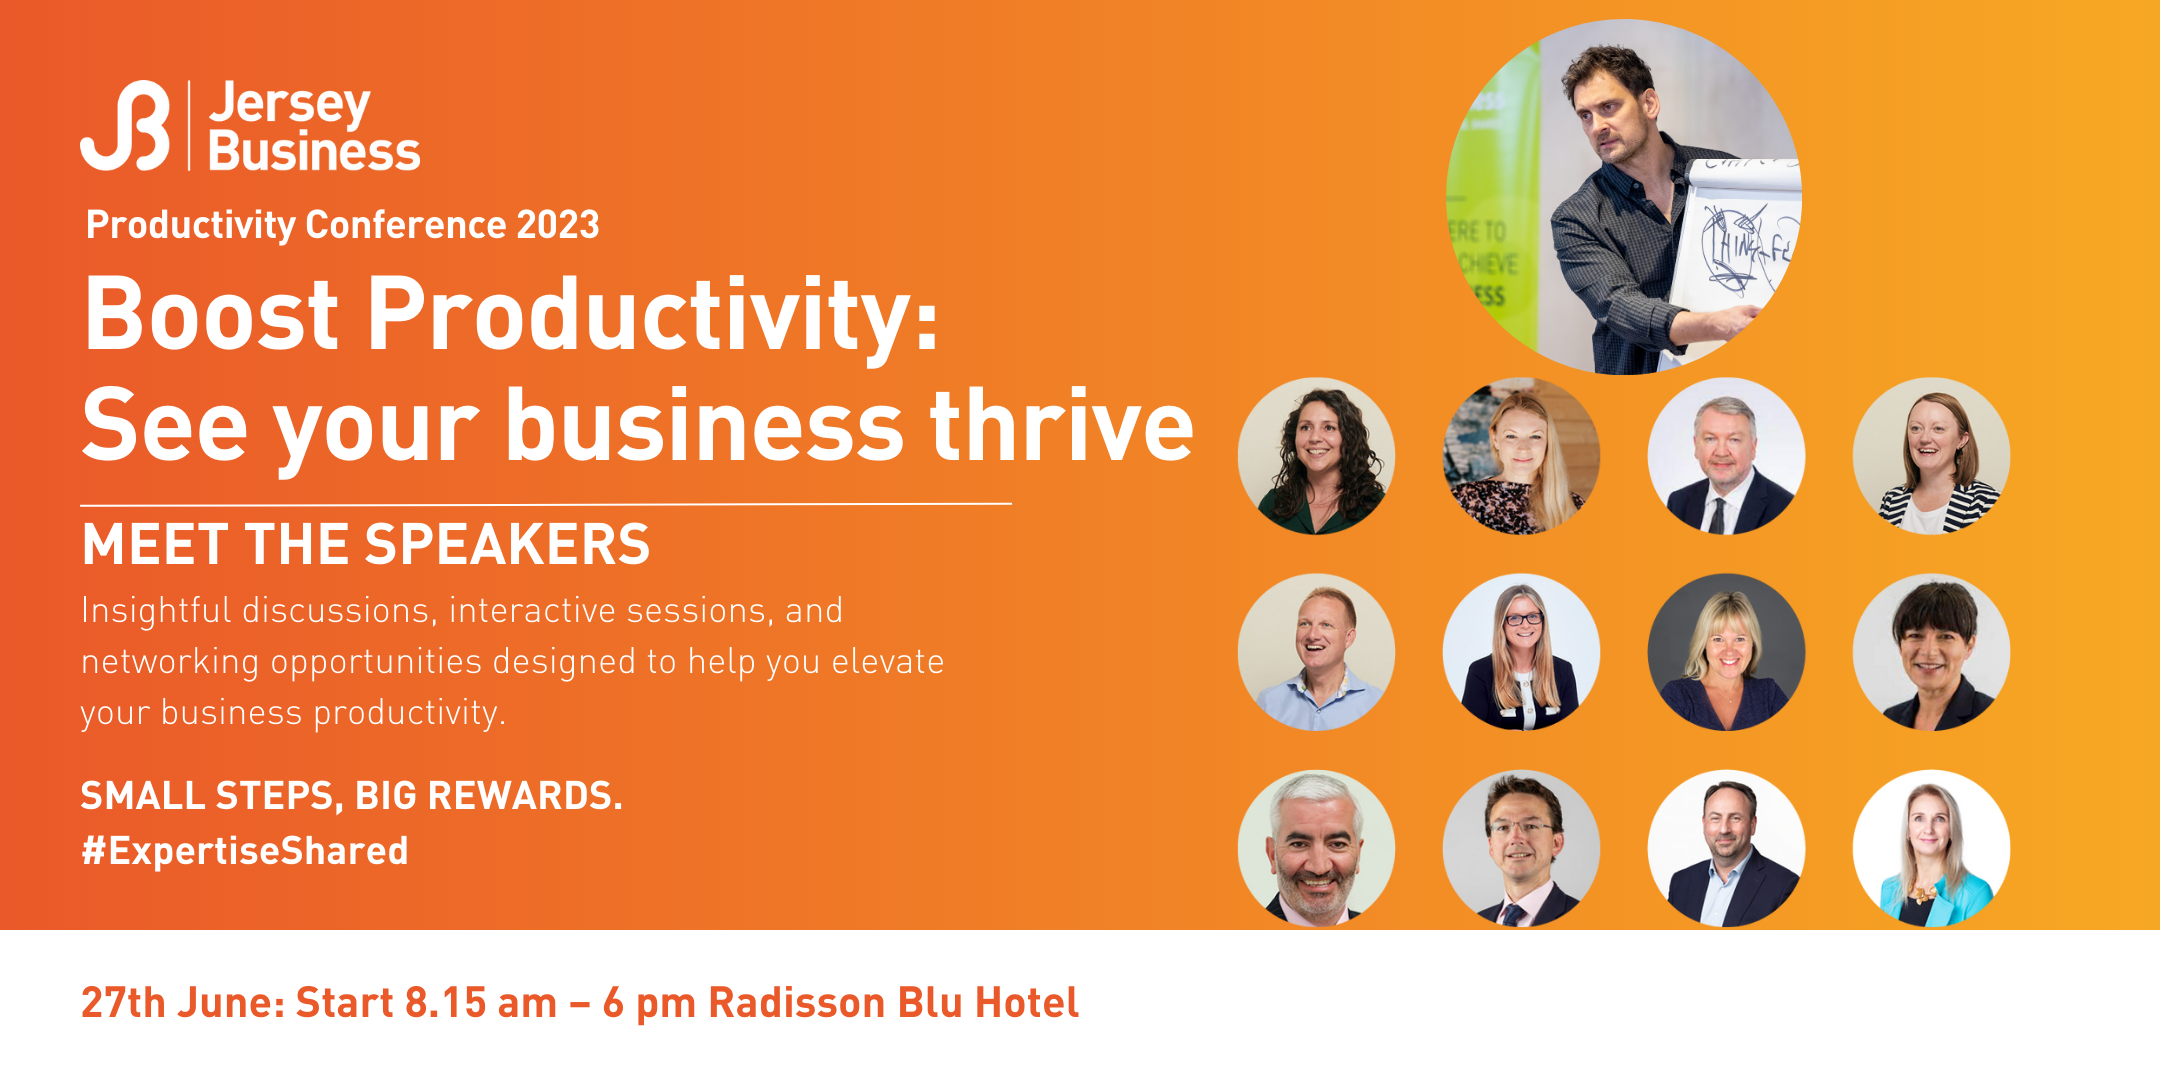 Pictures and descriptions of speakers for the Productivity conference